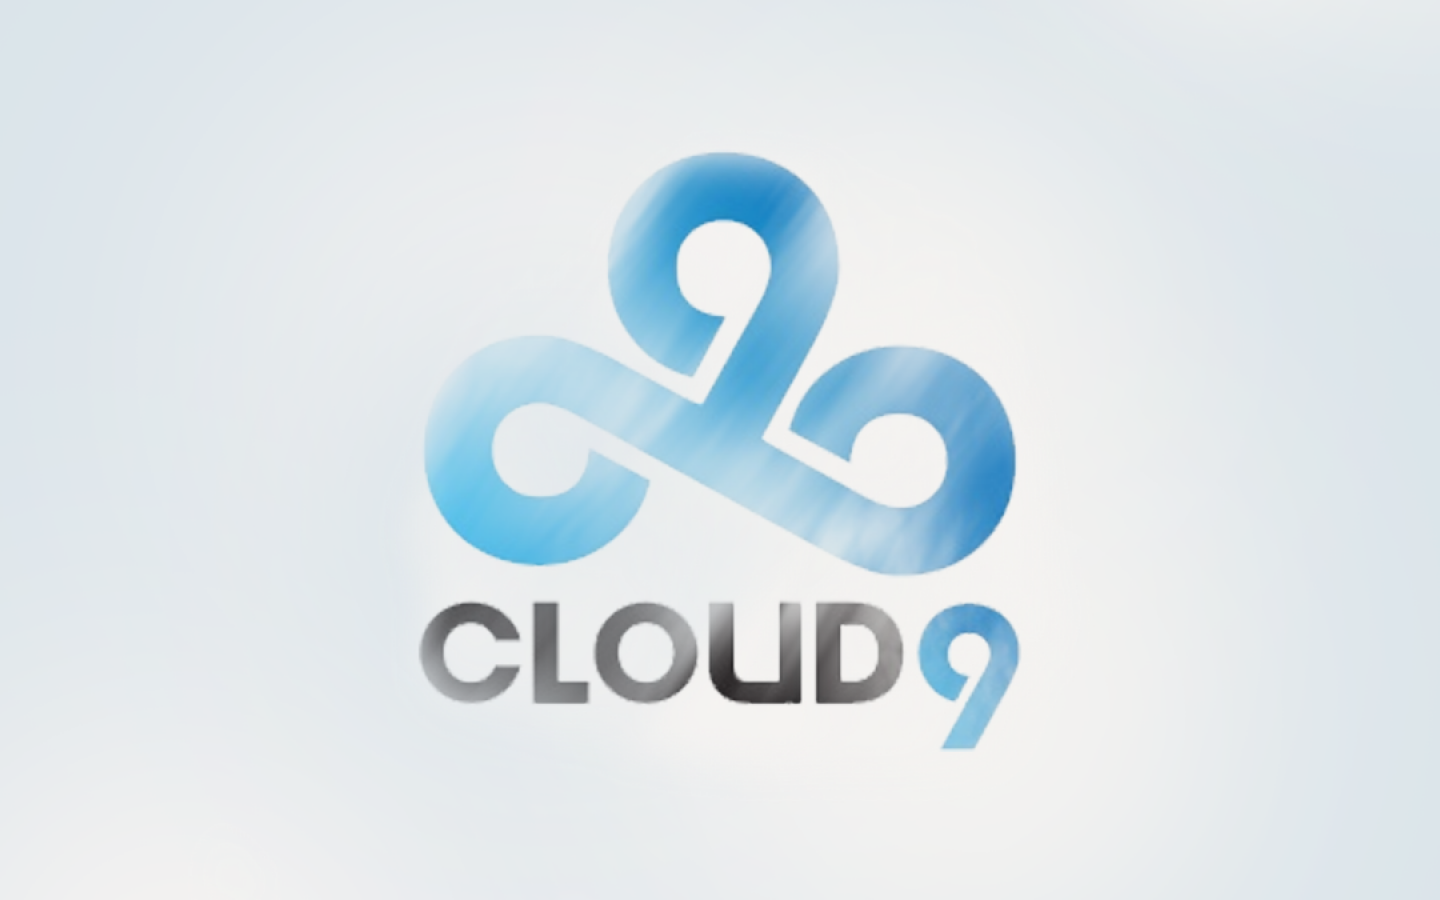 Find more Speed Gaming Cloud9. 